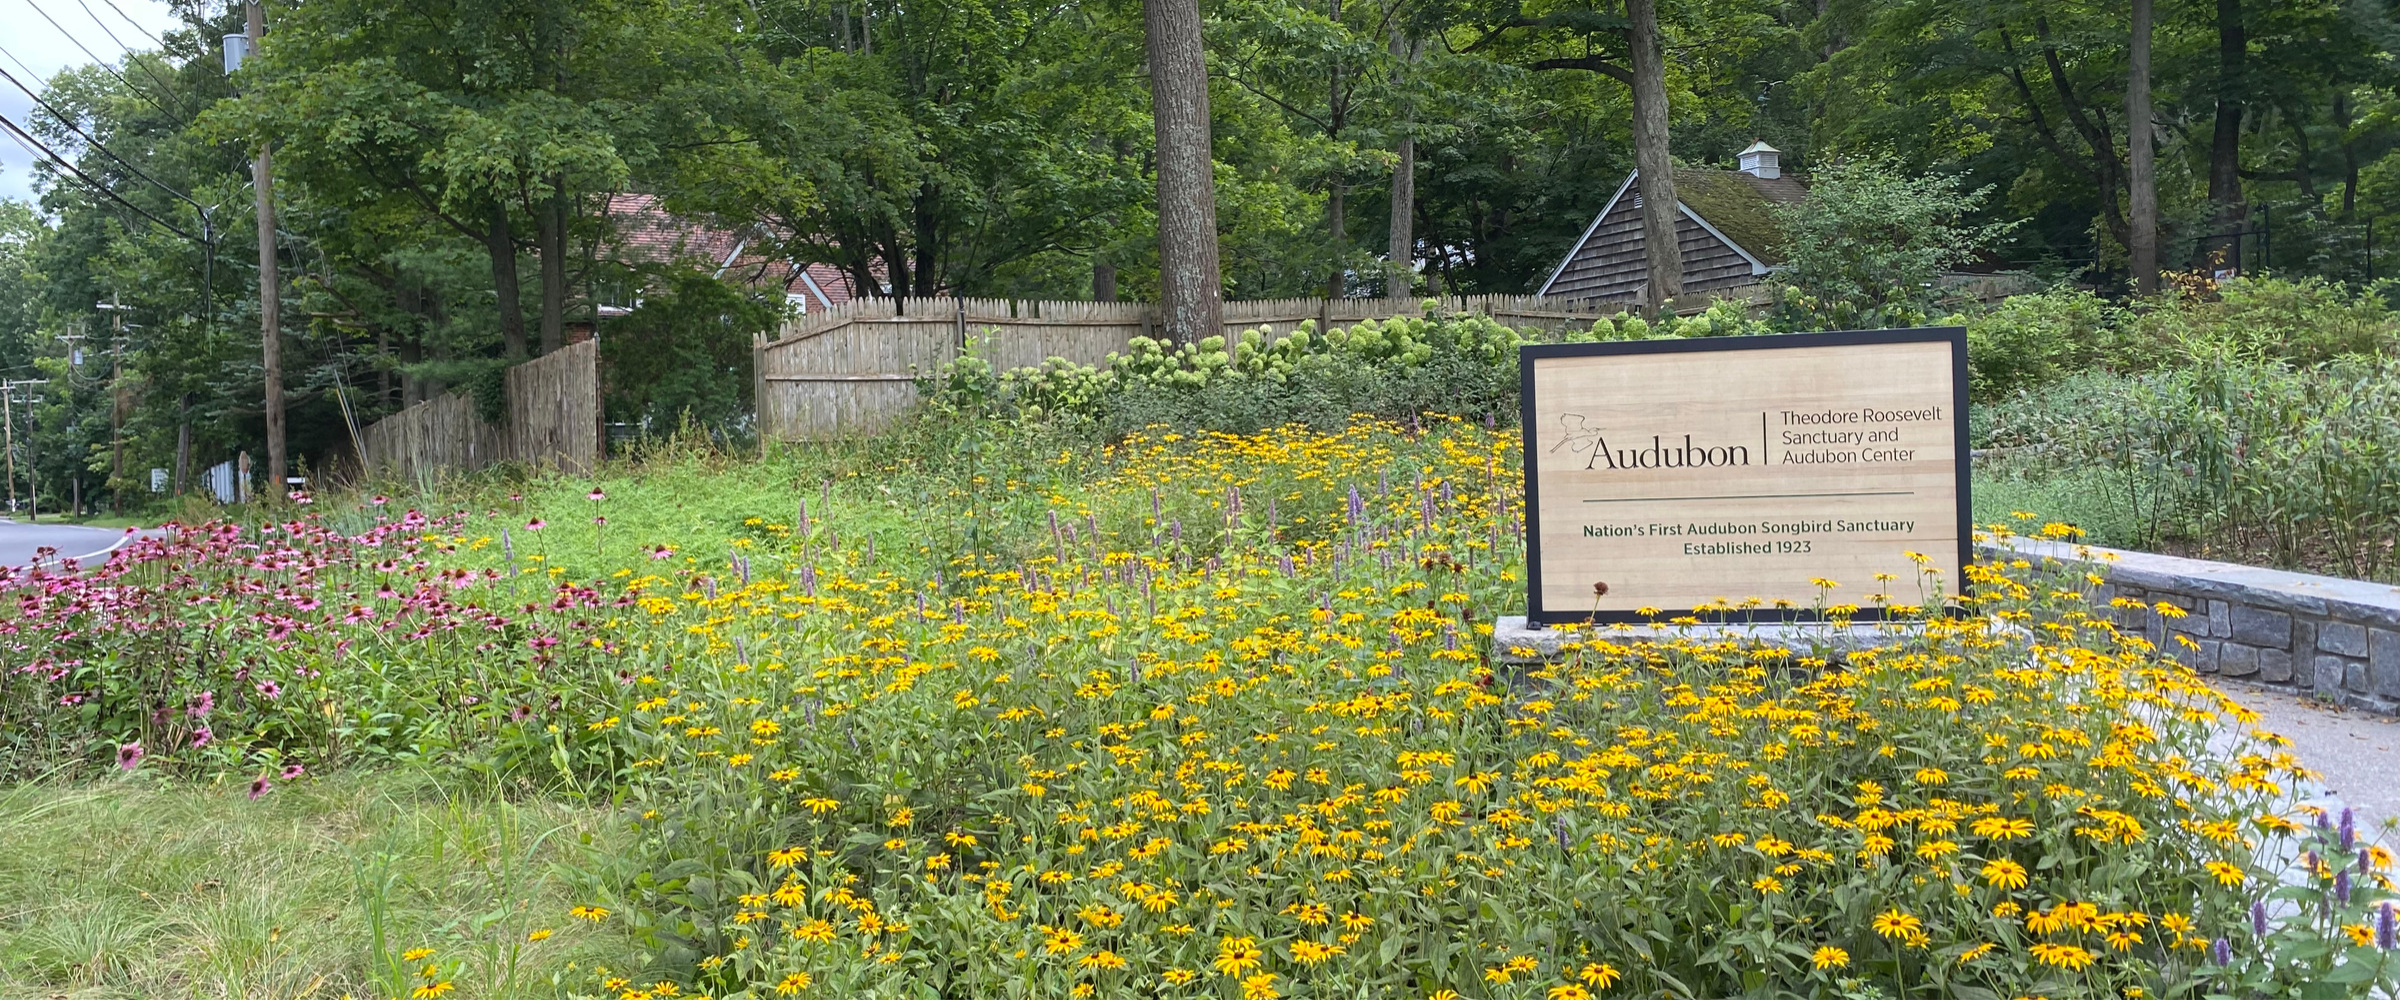 A garden composed of flowers of many colors with a paved path cutting through it. There is a sign that reads: Audubon Theodore Roosevelt Sanctuary and Audubon Center. Nation's first songbird sanctuary, established 1923.